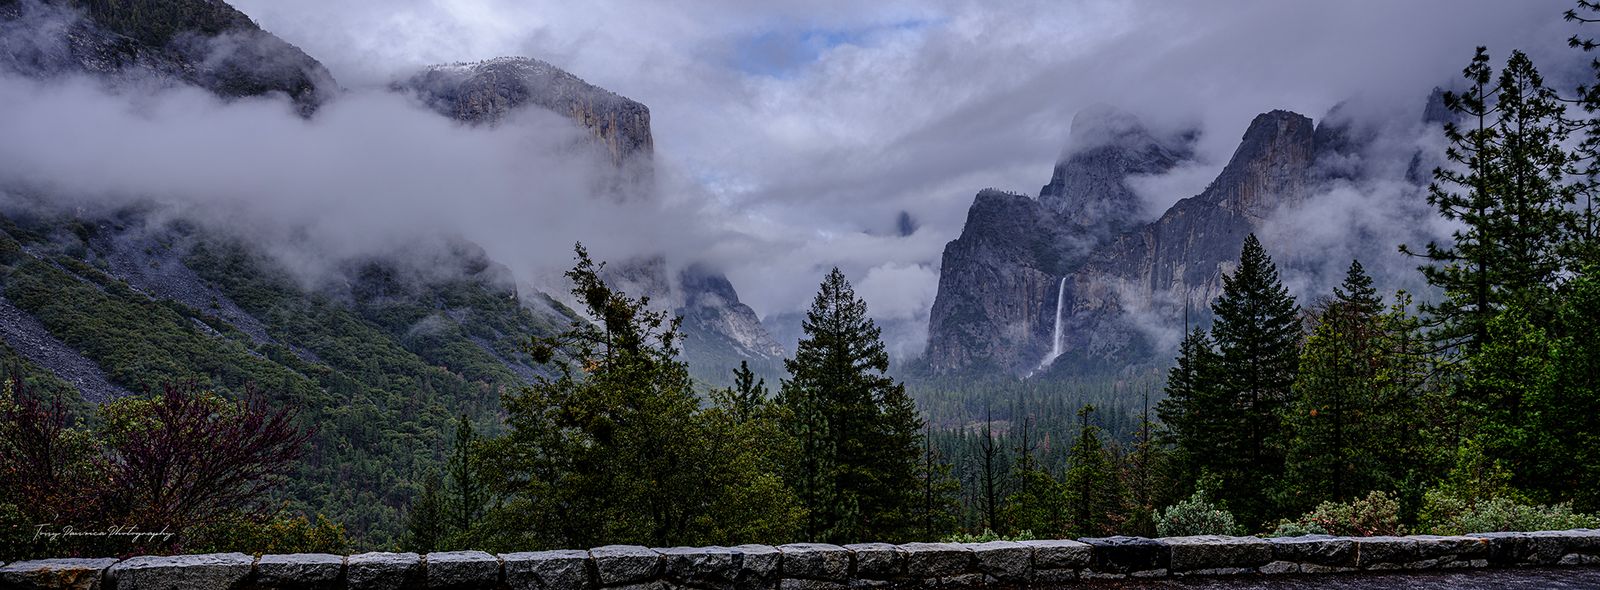 Yosemite National Park, Tunnel View,  April 2022 